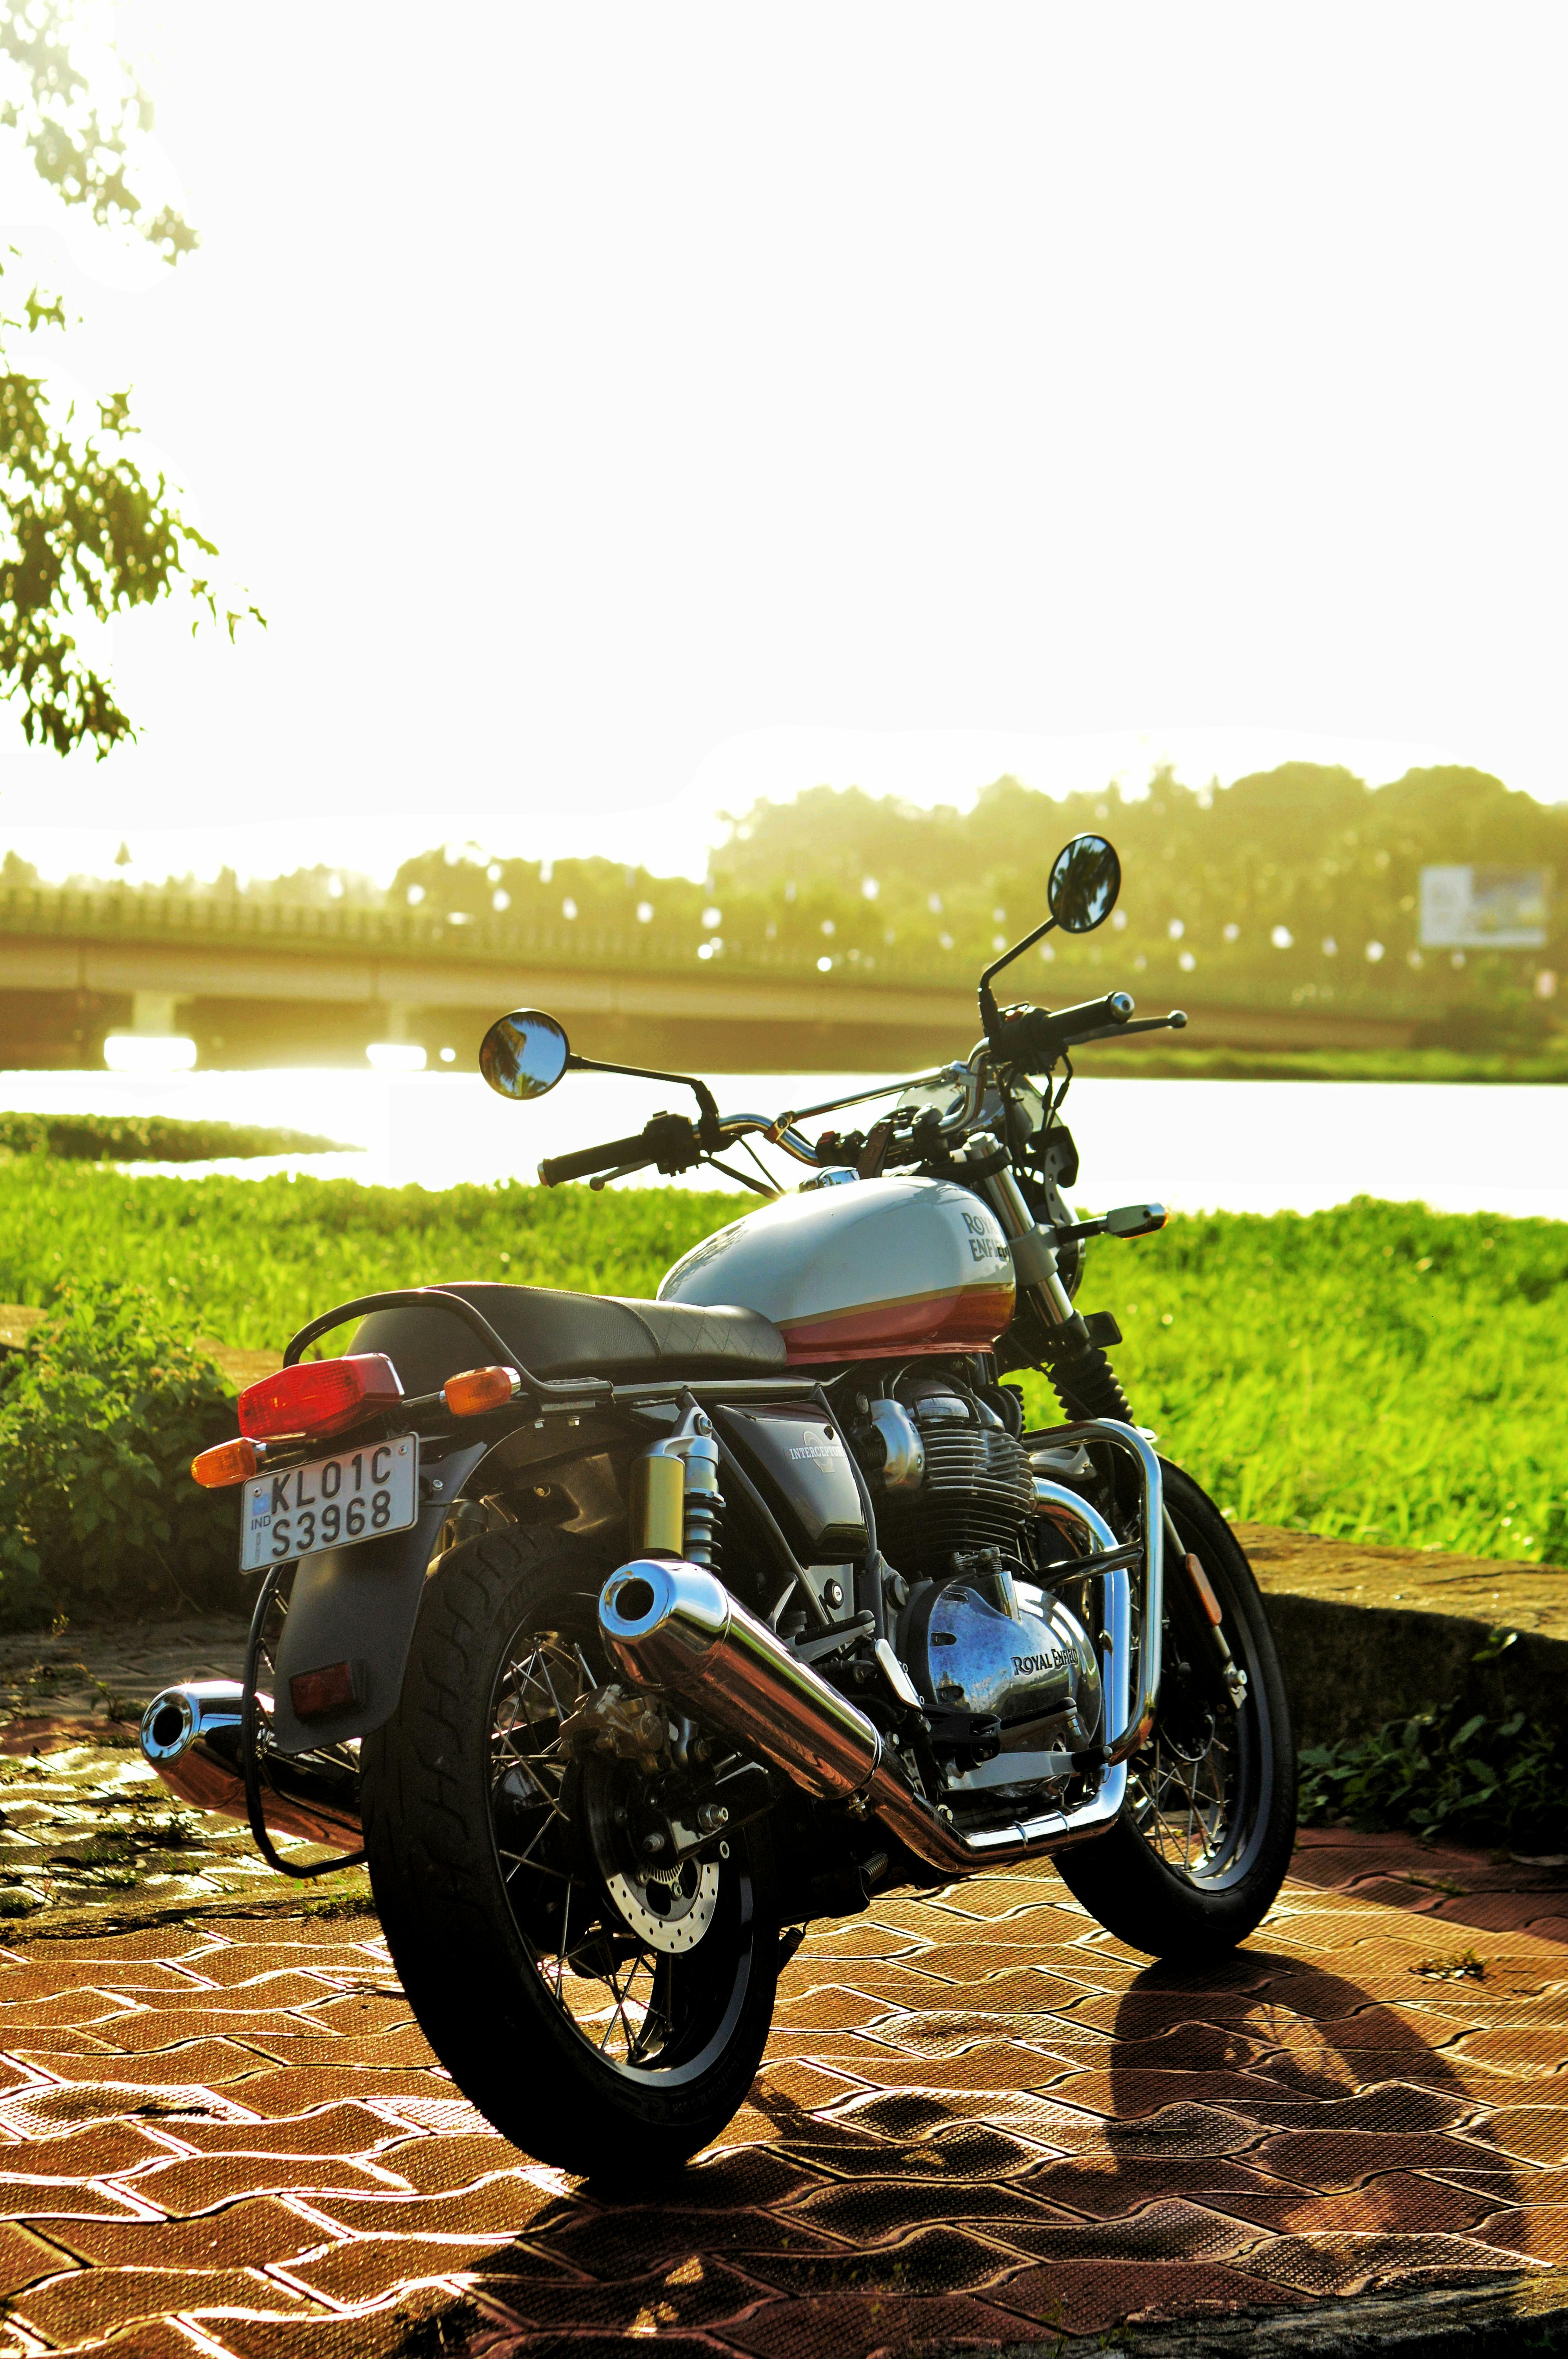 Royal Enfield Bike Photos, Download The BEST Free Royal Enfield Bike Stock  Photos & HD Images